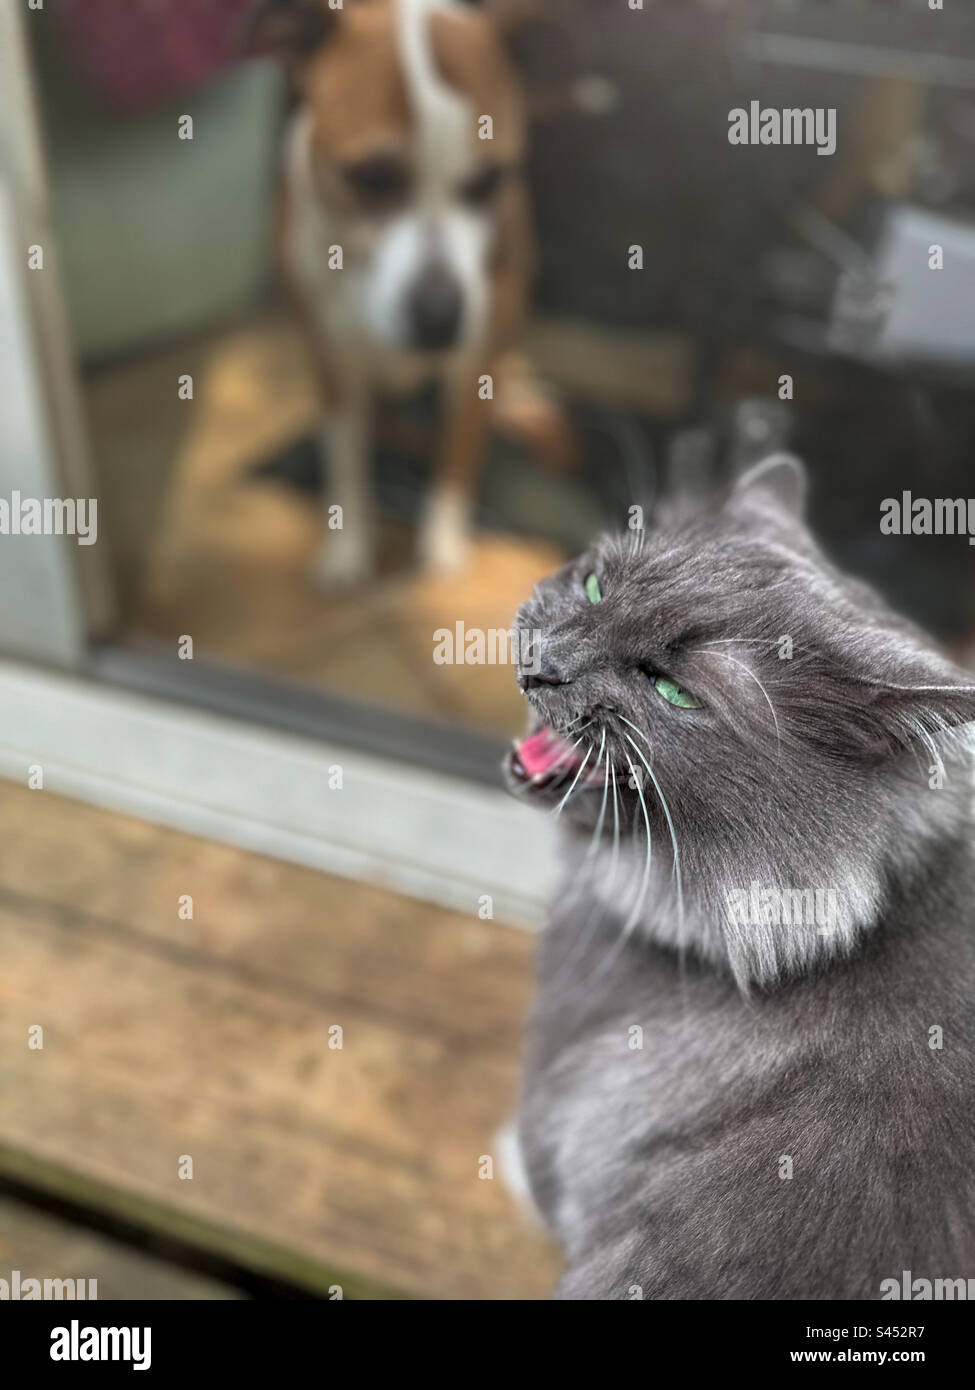 Adorable fluffy grey and white cat with green eyes making a funny face meowing while dog looks sad behind glass door. Stock Photo